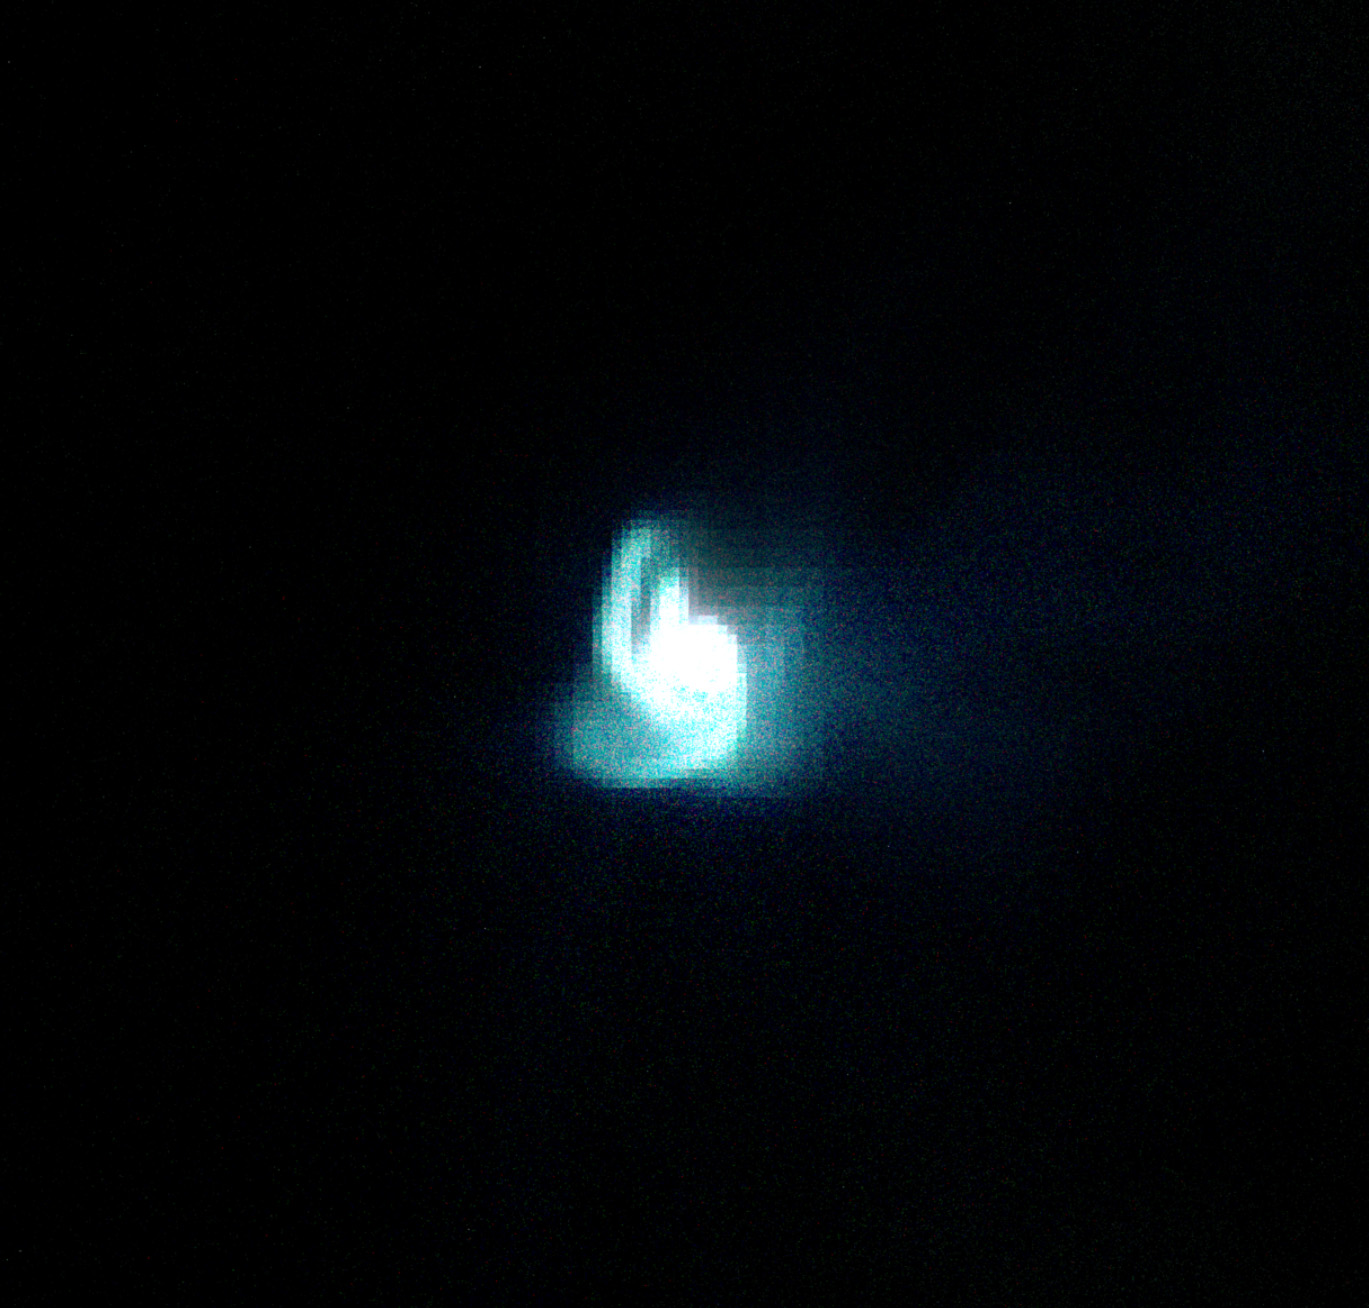 Image is a simulated UV false-color image showing heated gas spiraling into the black hole in the center. (Credit: Georgia Tech)